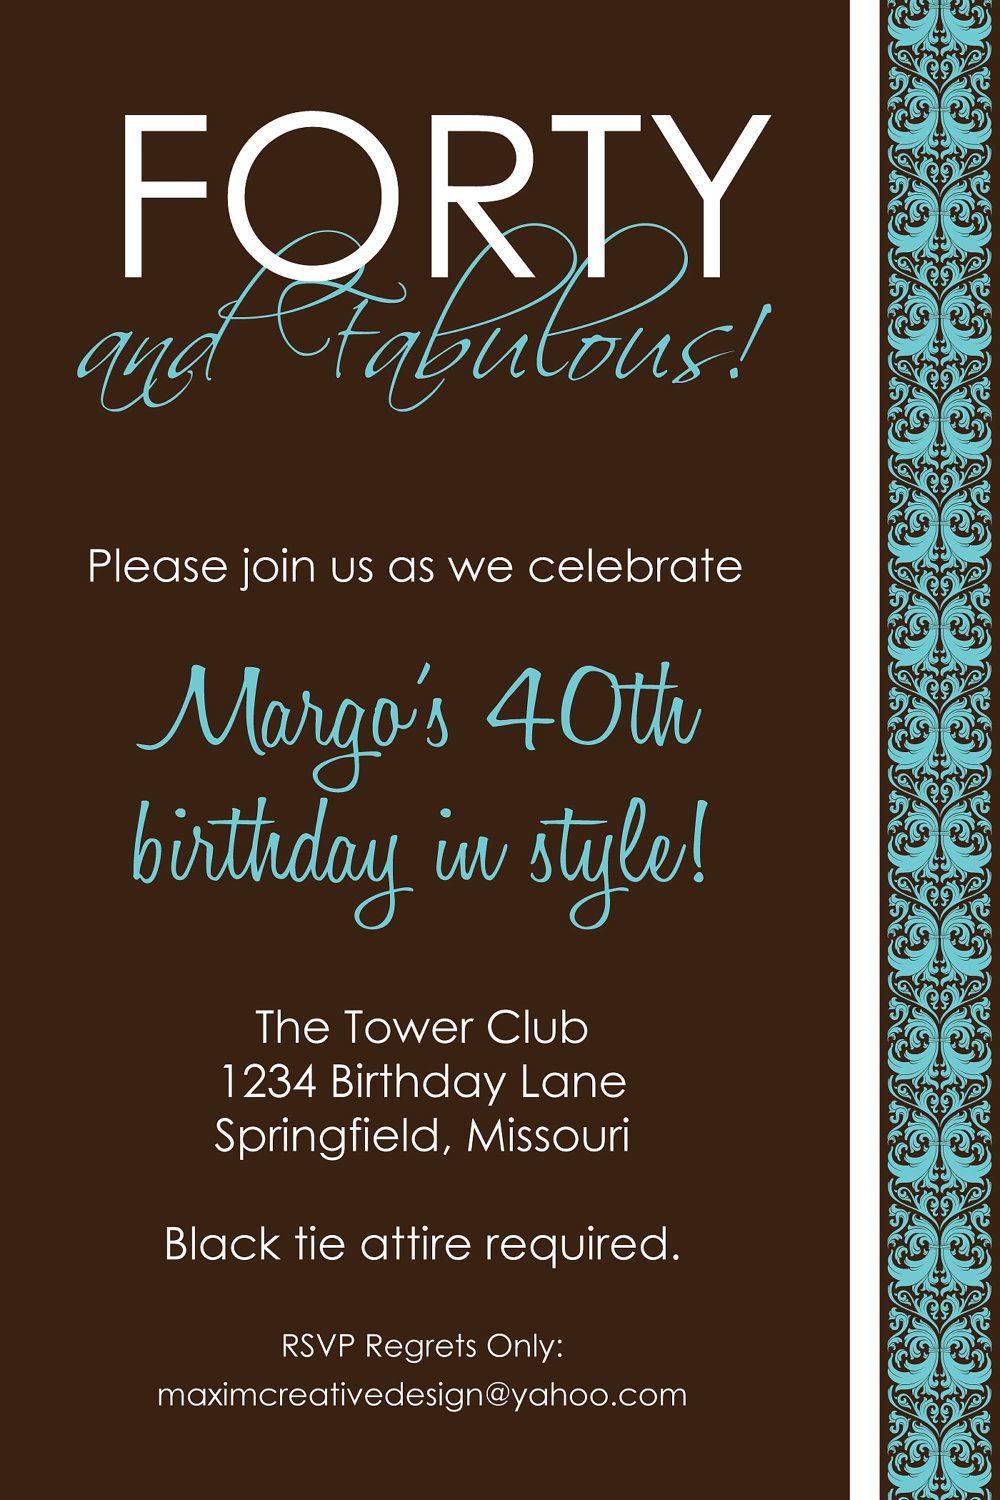 Funny Birthday Invitation Wording For Adults
 birthday invitations Funny birthday invites for adults